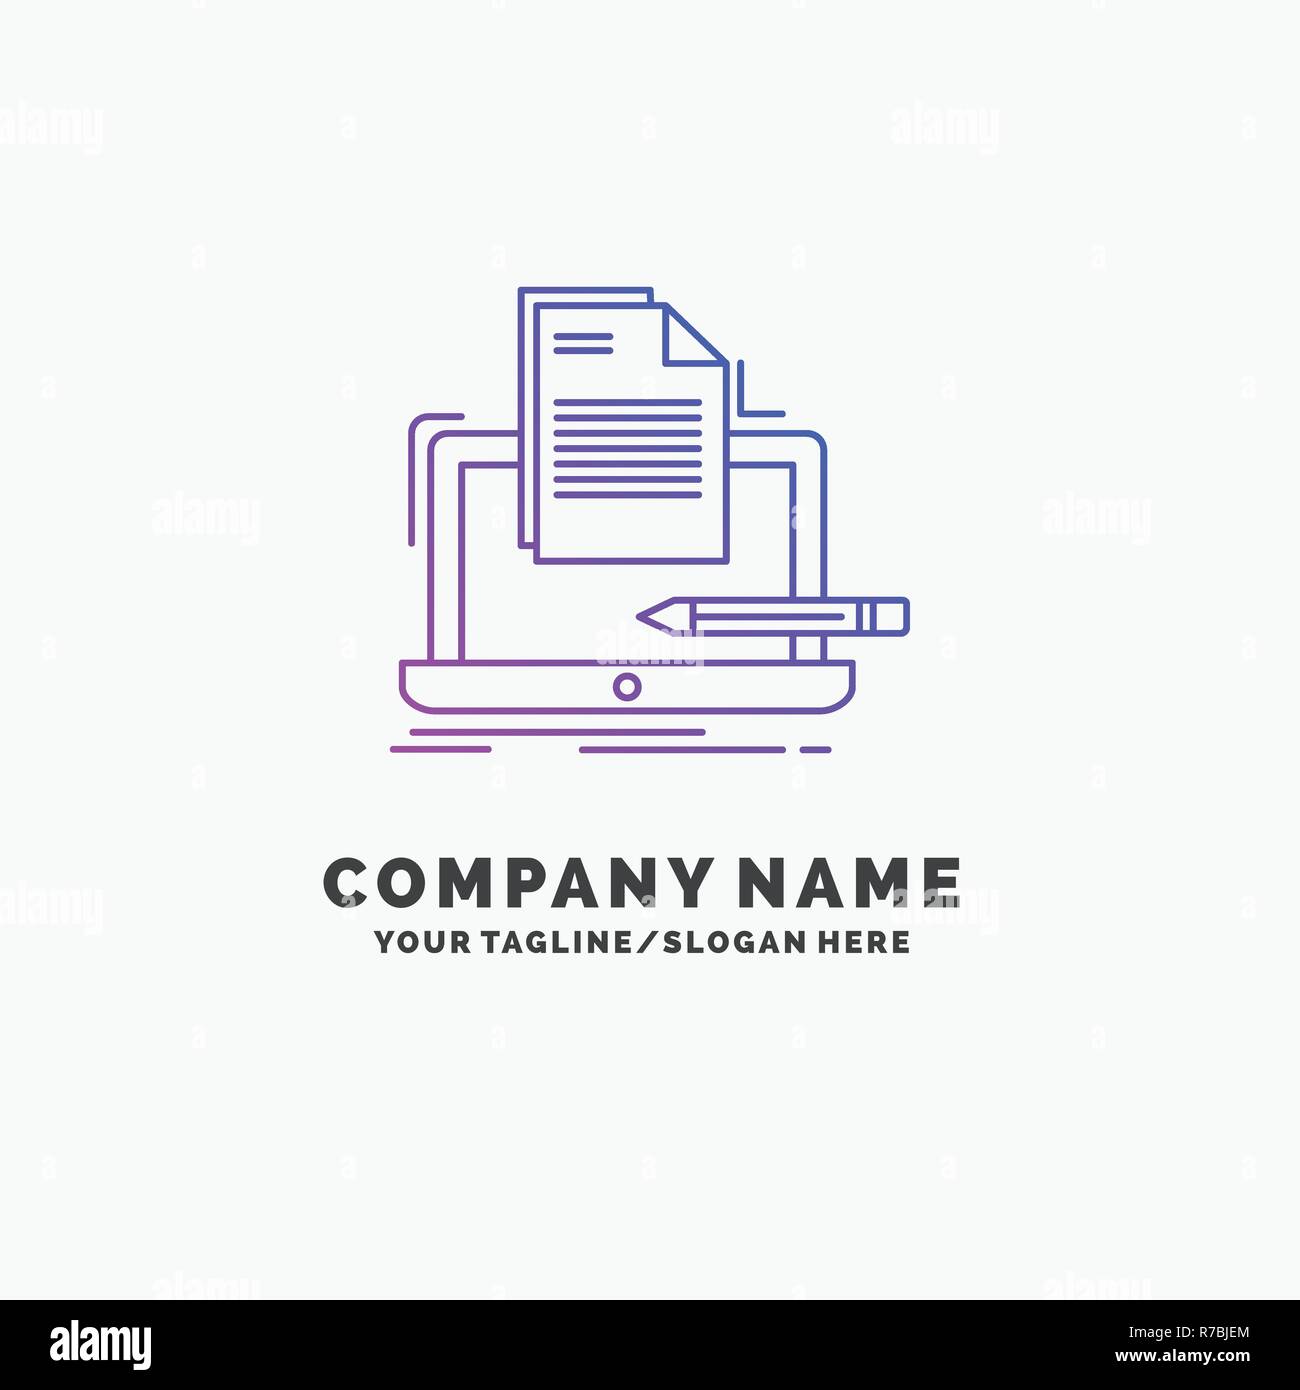 Coder, coding, computer, list, paper Purple Business Logo Template. Place for Tagline Stock Vector